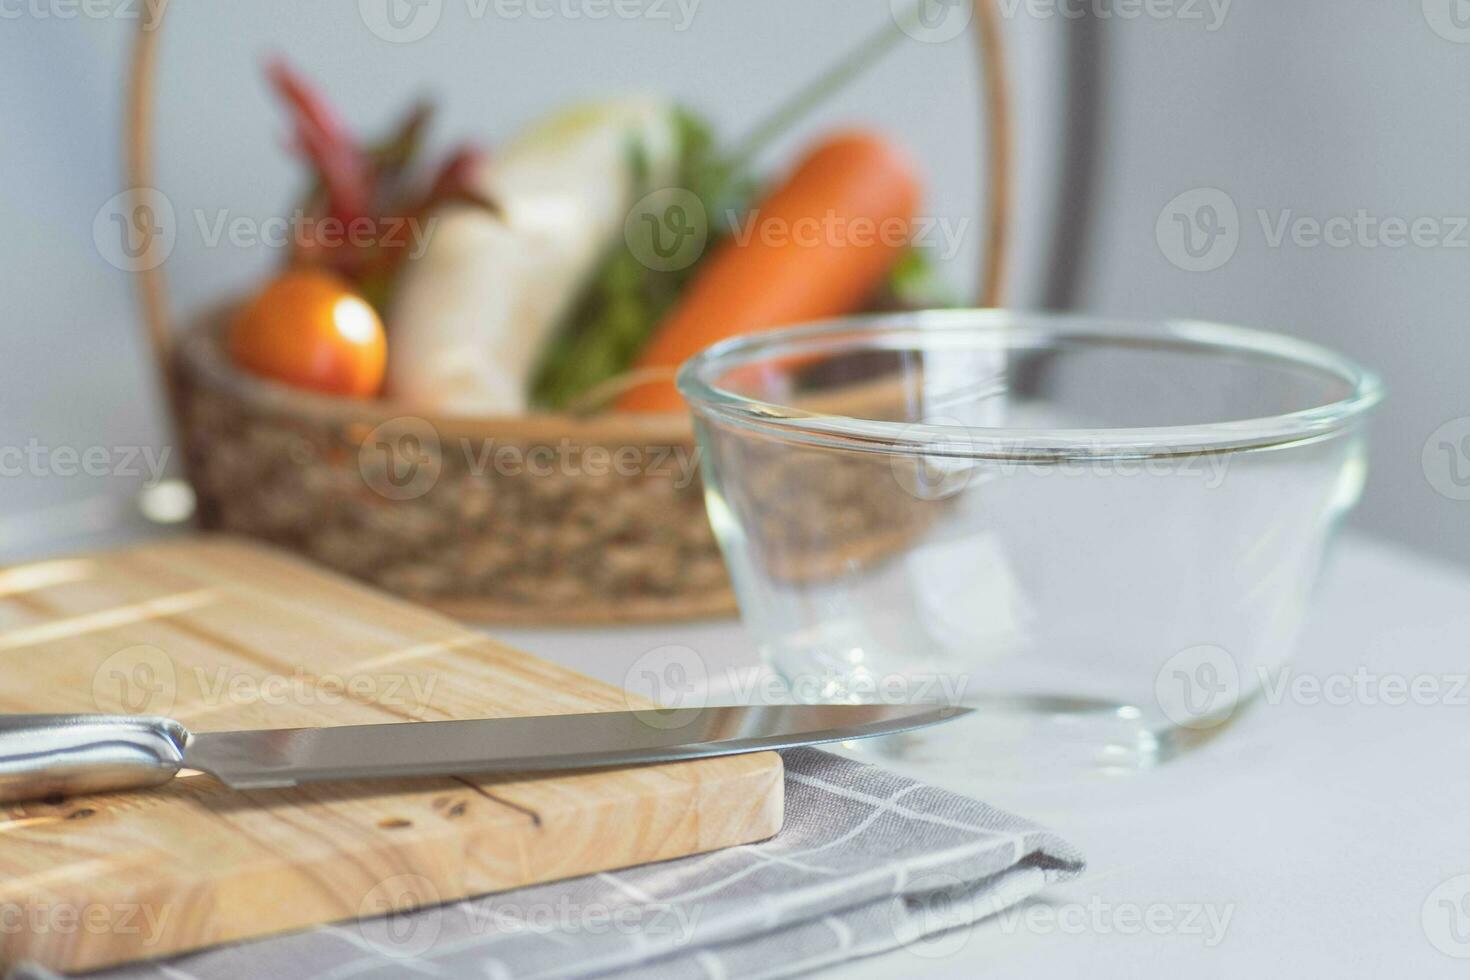 Organic vegetables and kitchen utensils prepared for cooking in the kitchen. Healthy homemade food photo